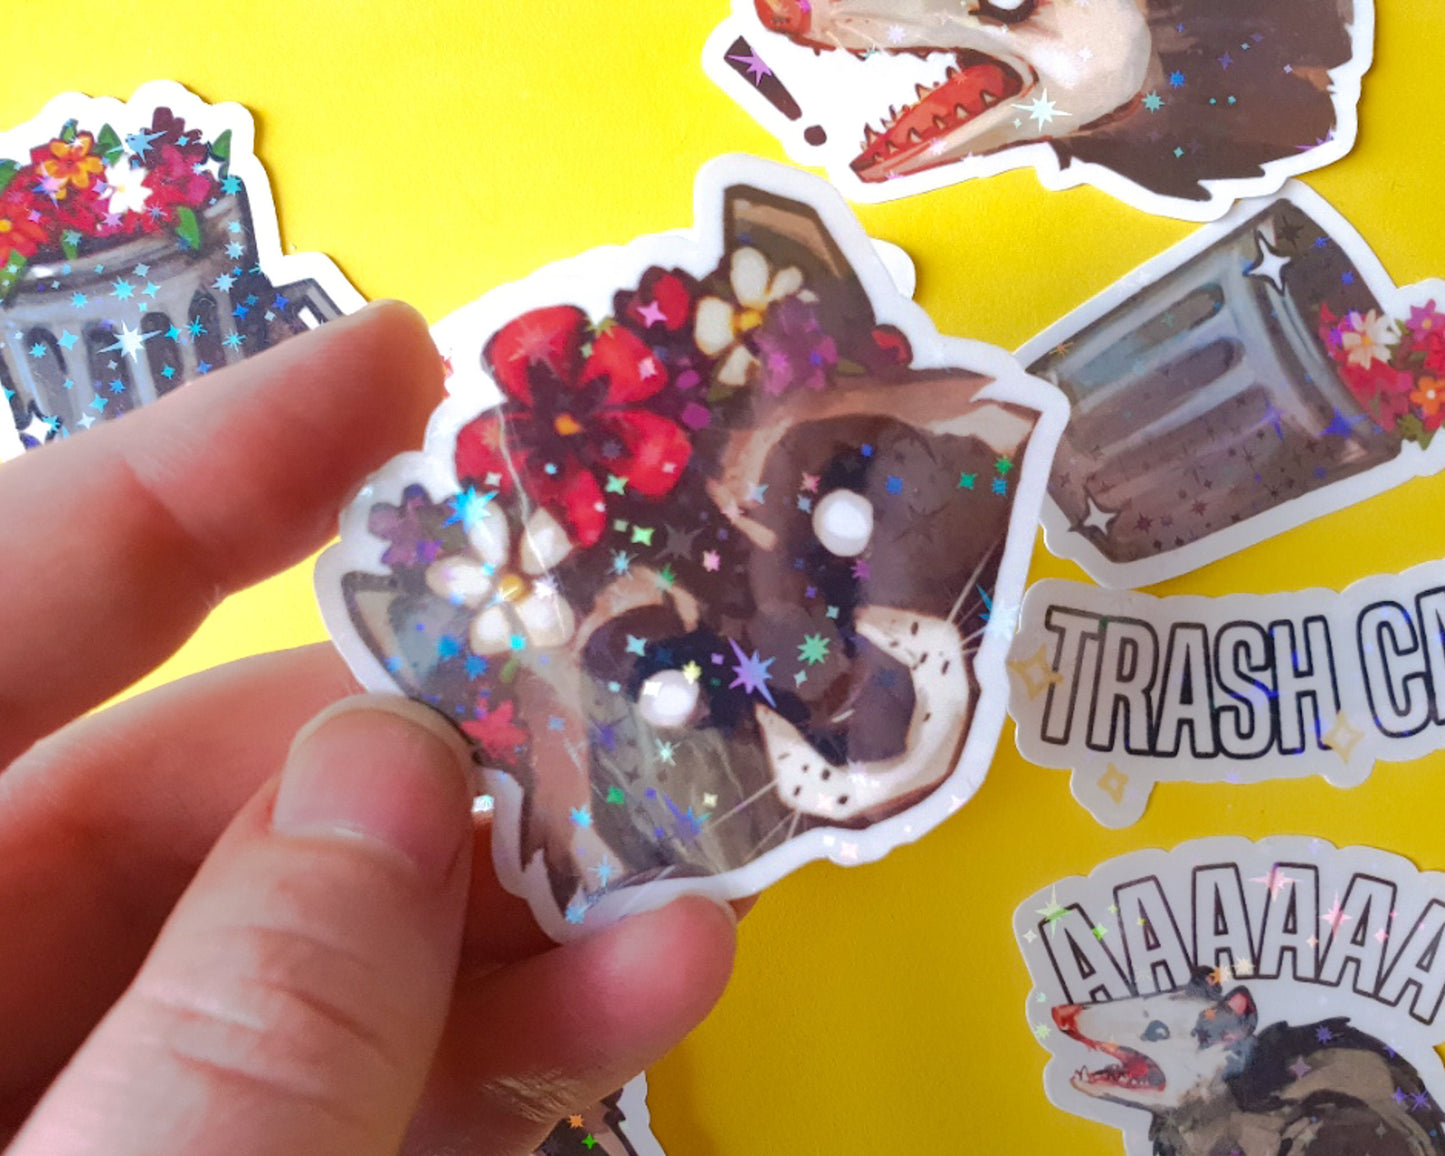 Trash Critters Sticker Pack - 9 Holographic Vinyl Stickers